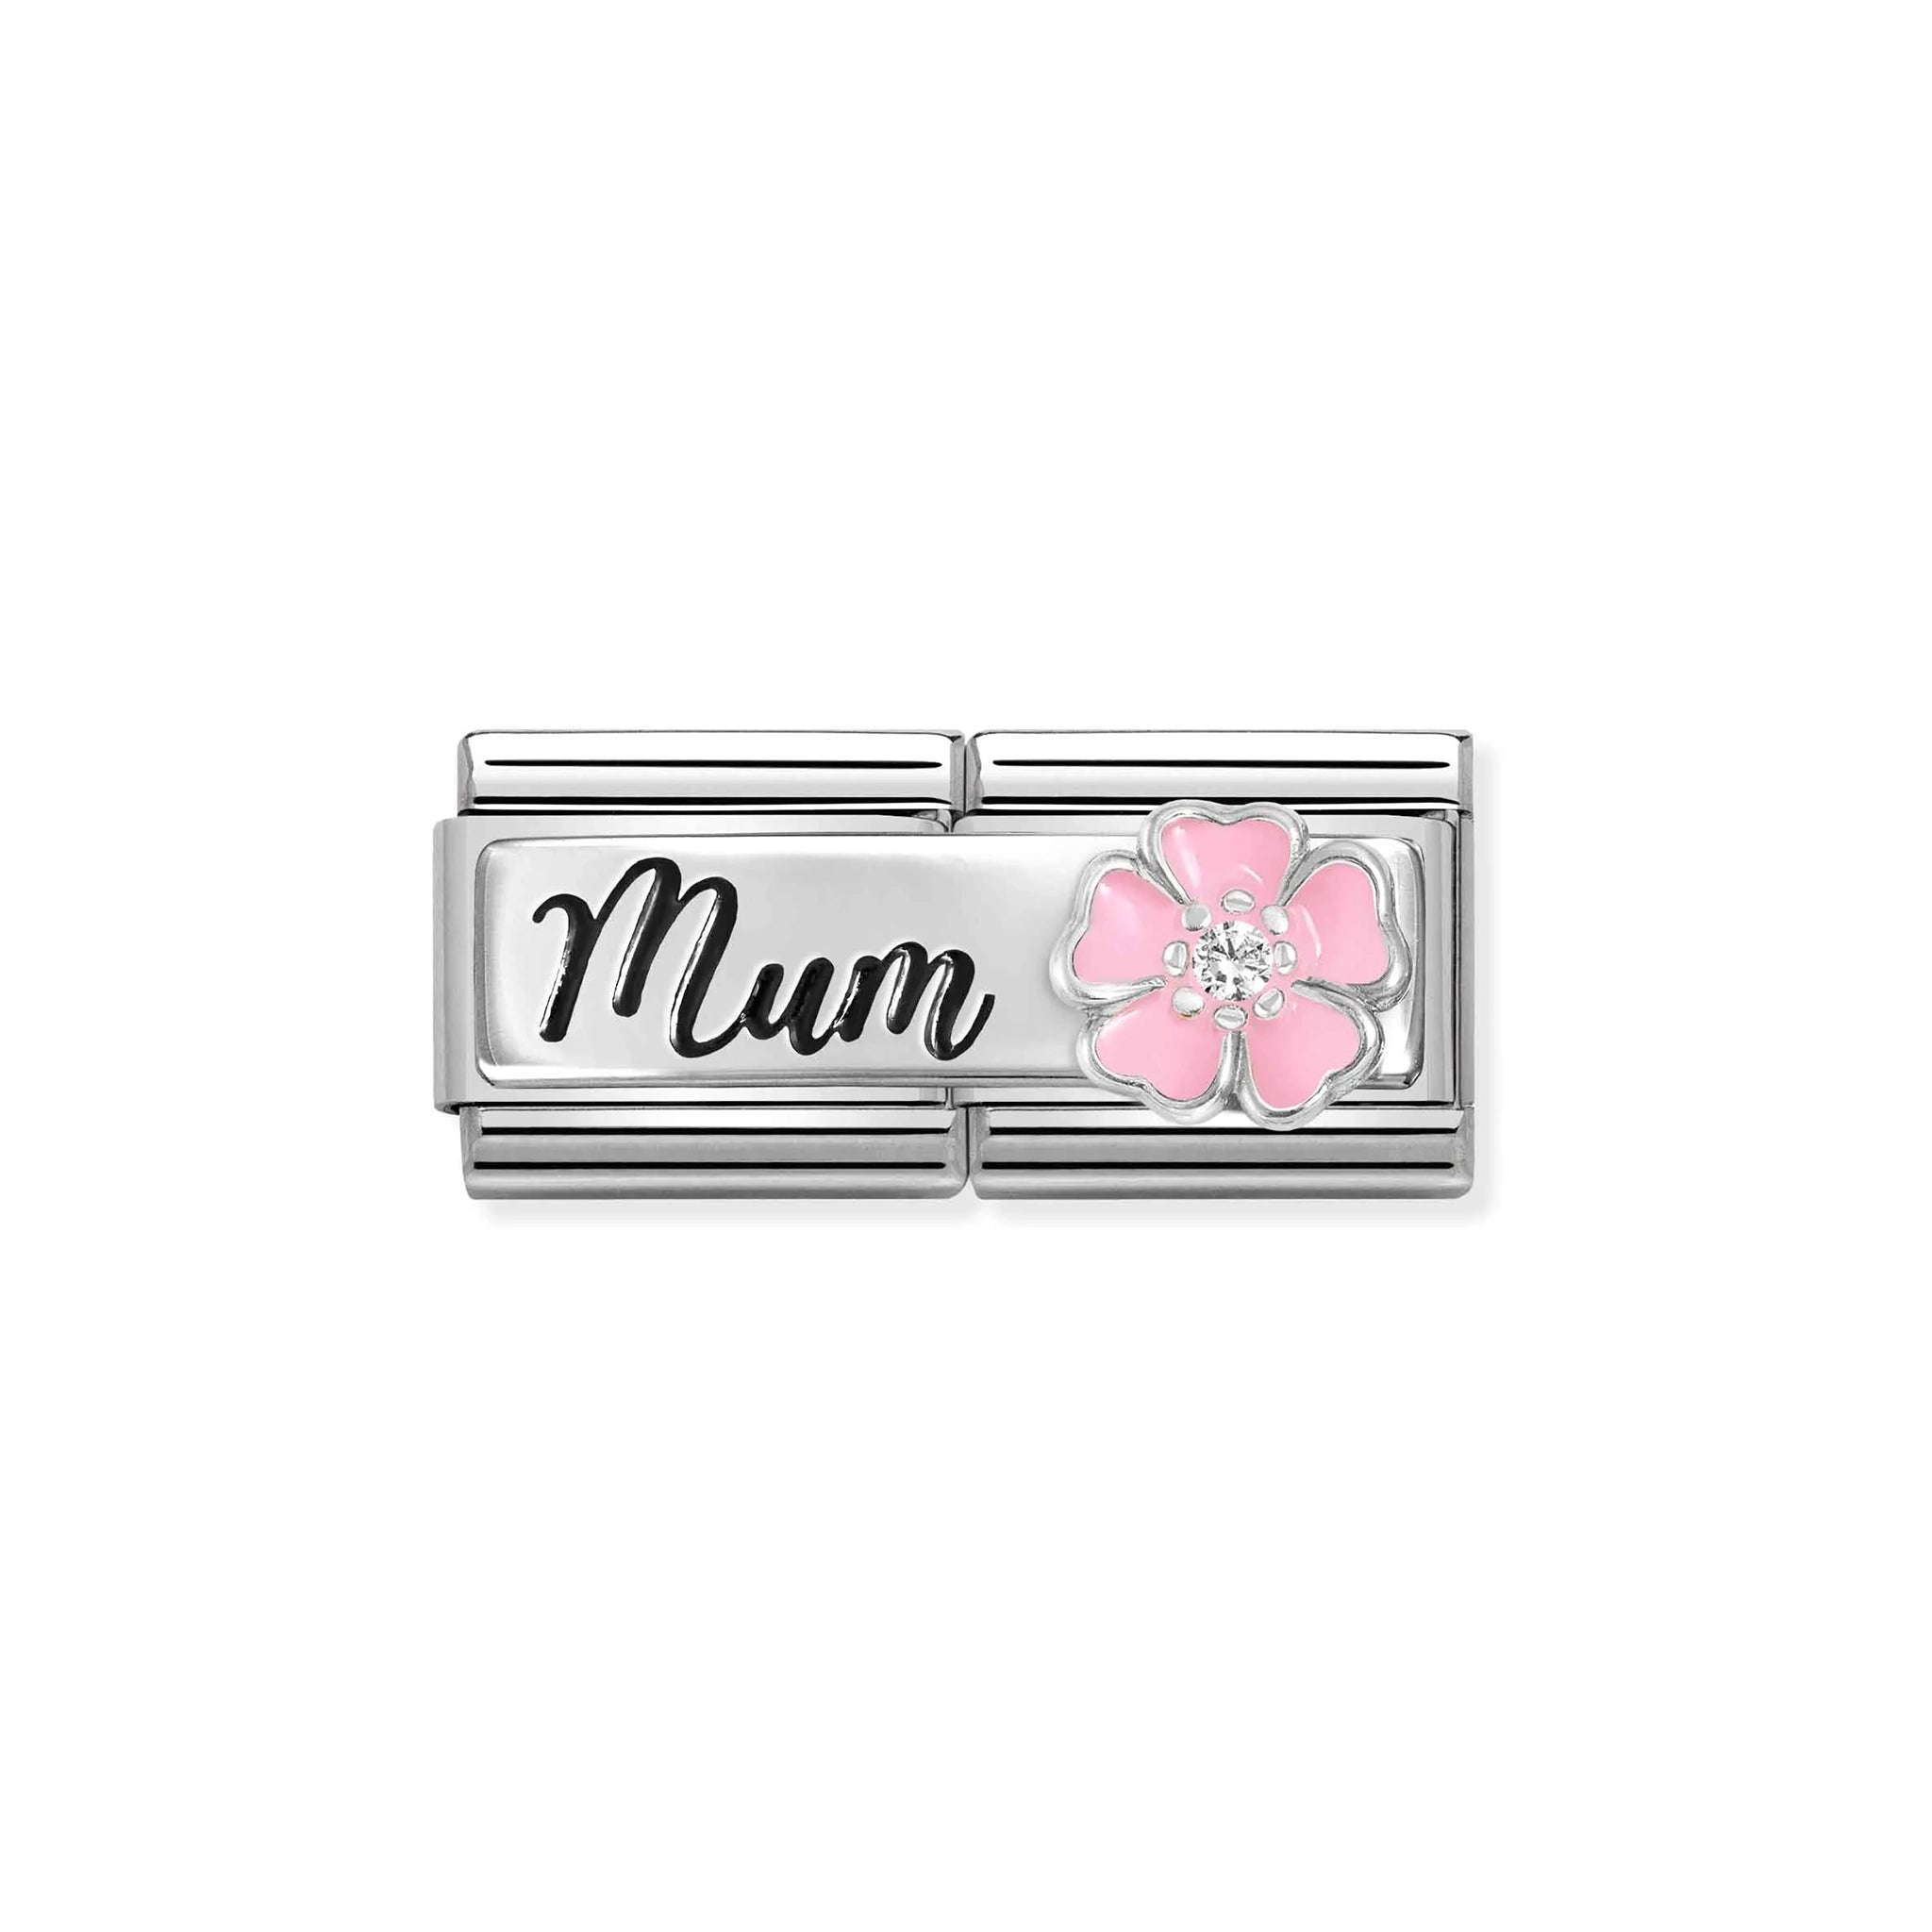 A double Nomination charm in silver featuring the word 'mum' and a pink enamel flower